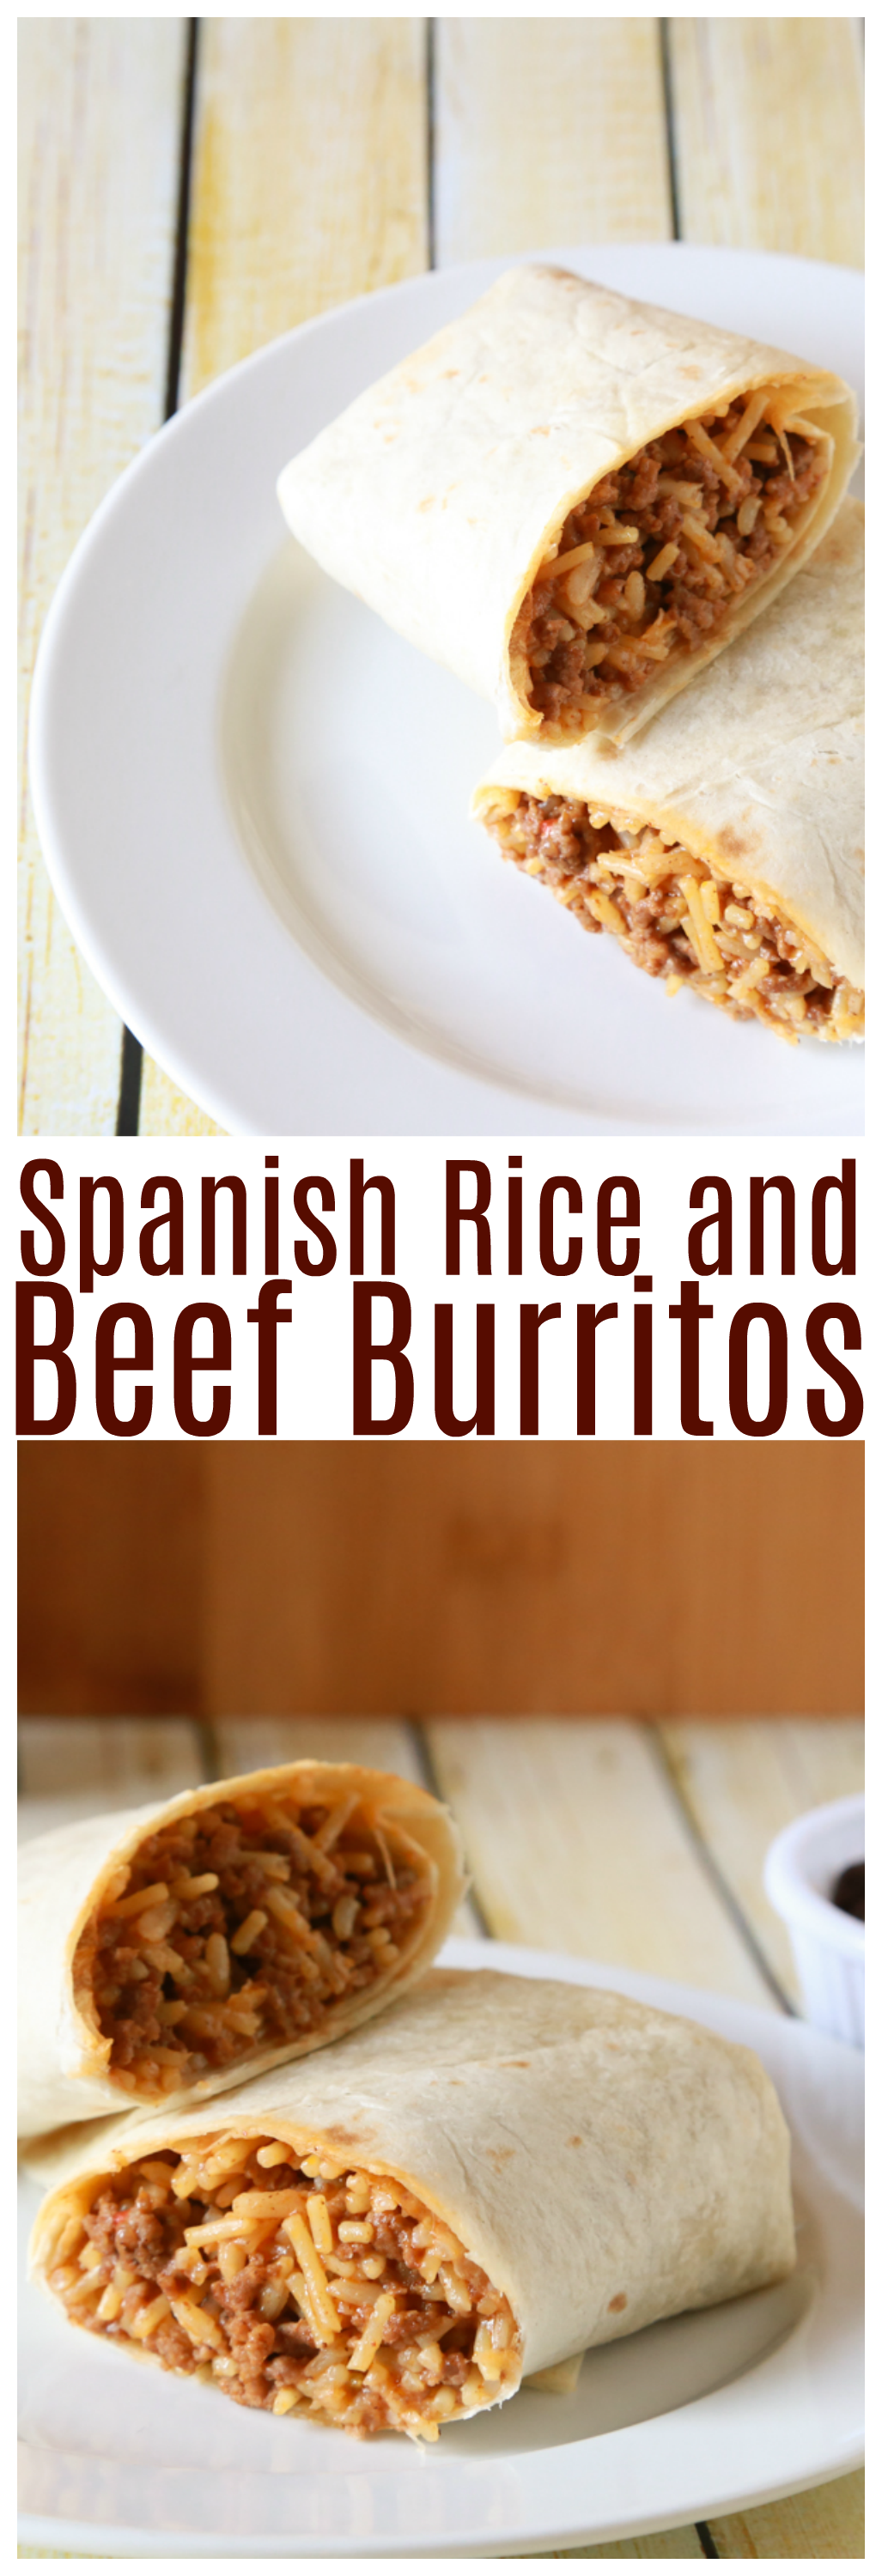 Spanish Rice and Beef Burritos | Simply Being Mommy